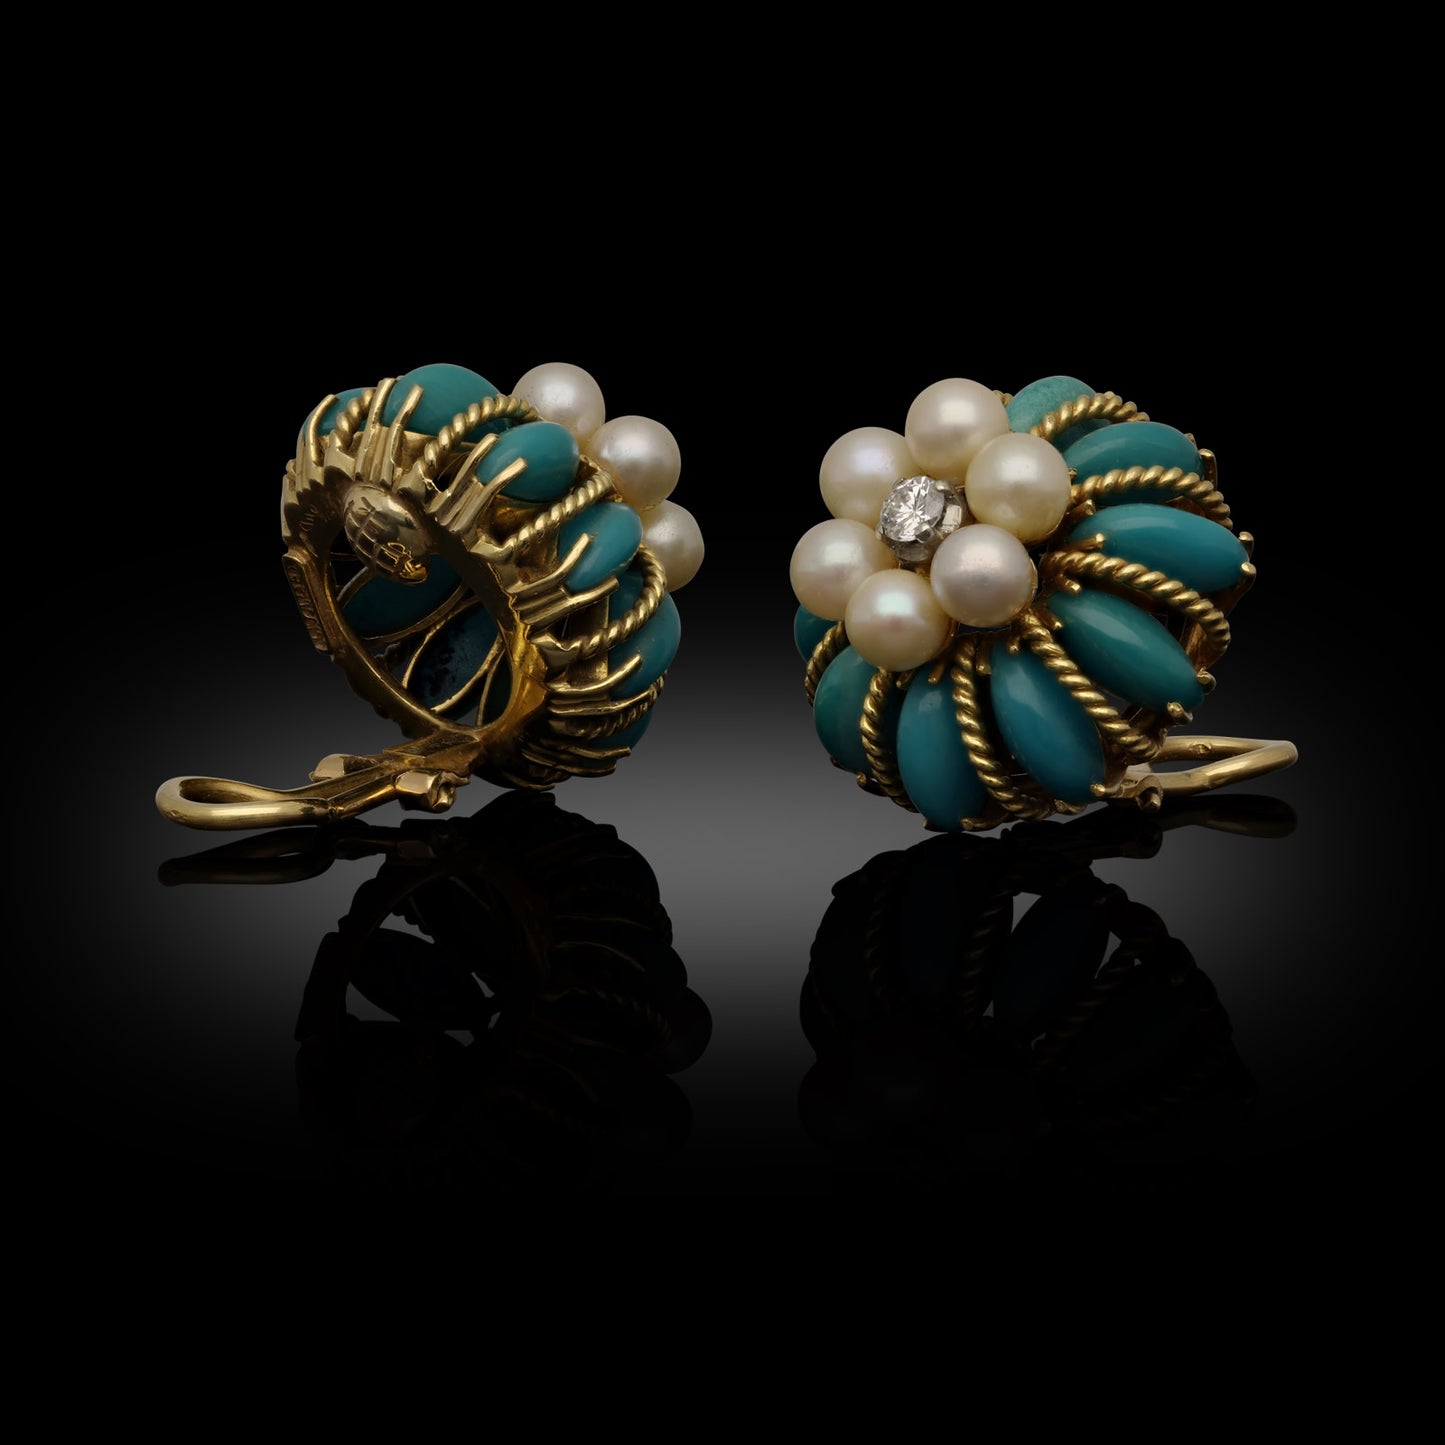 Tiffany & Co. 1960s 18KT Yellow Gold Diamond, Pearl & Turquoise Earrings side view